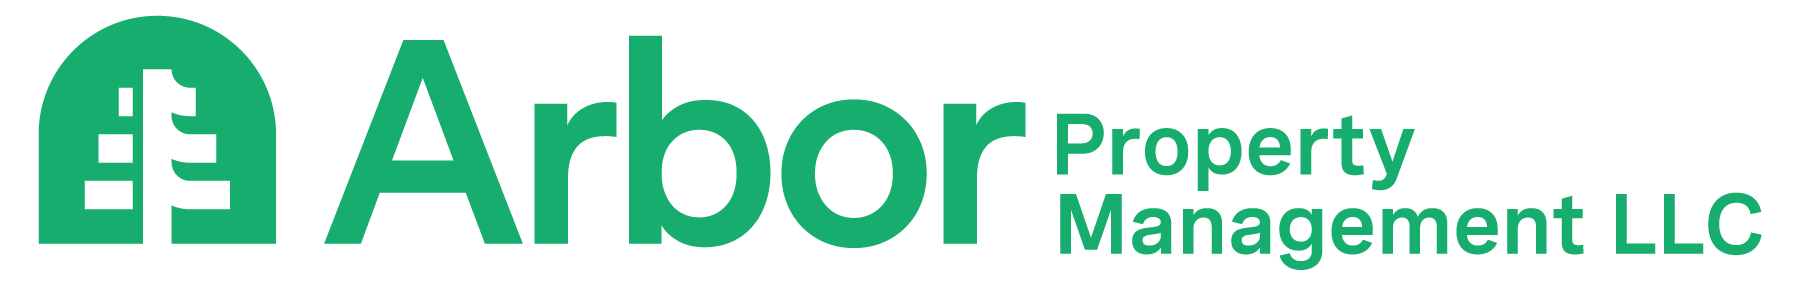 Arbor Property Management Logo in Header - linked to home page